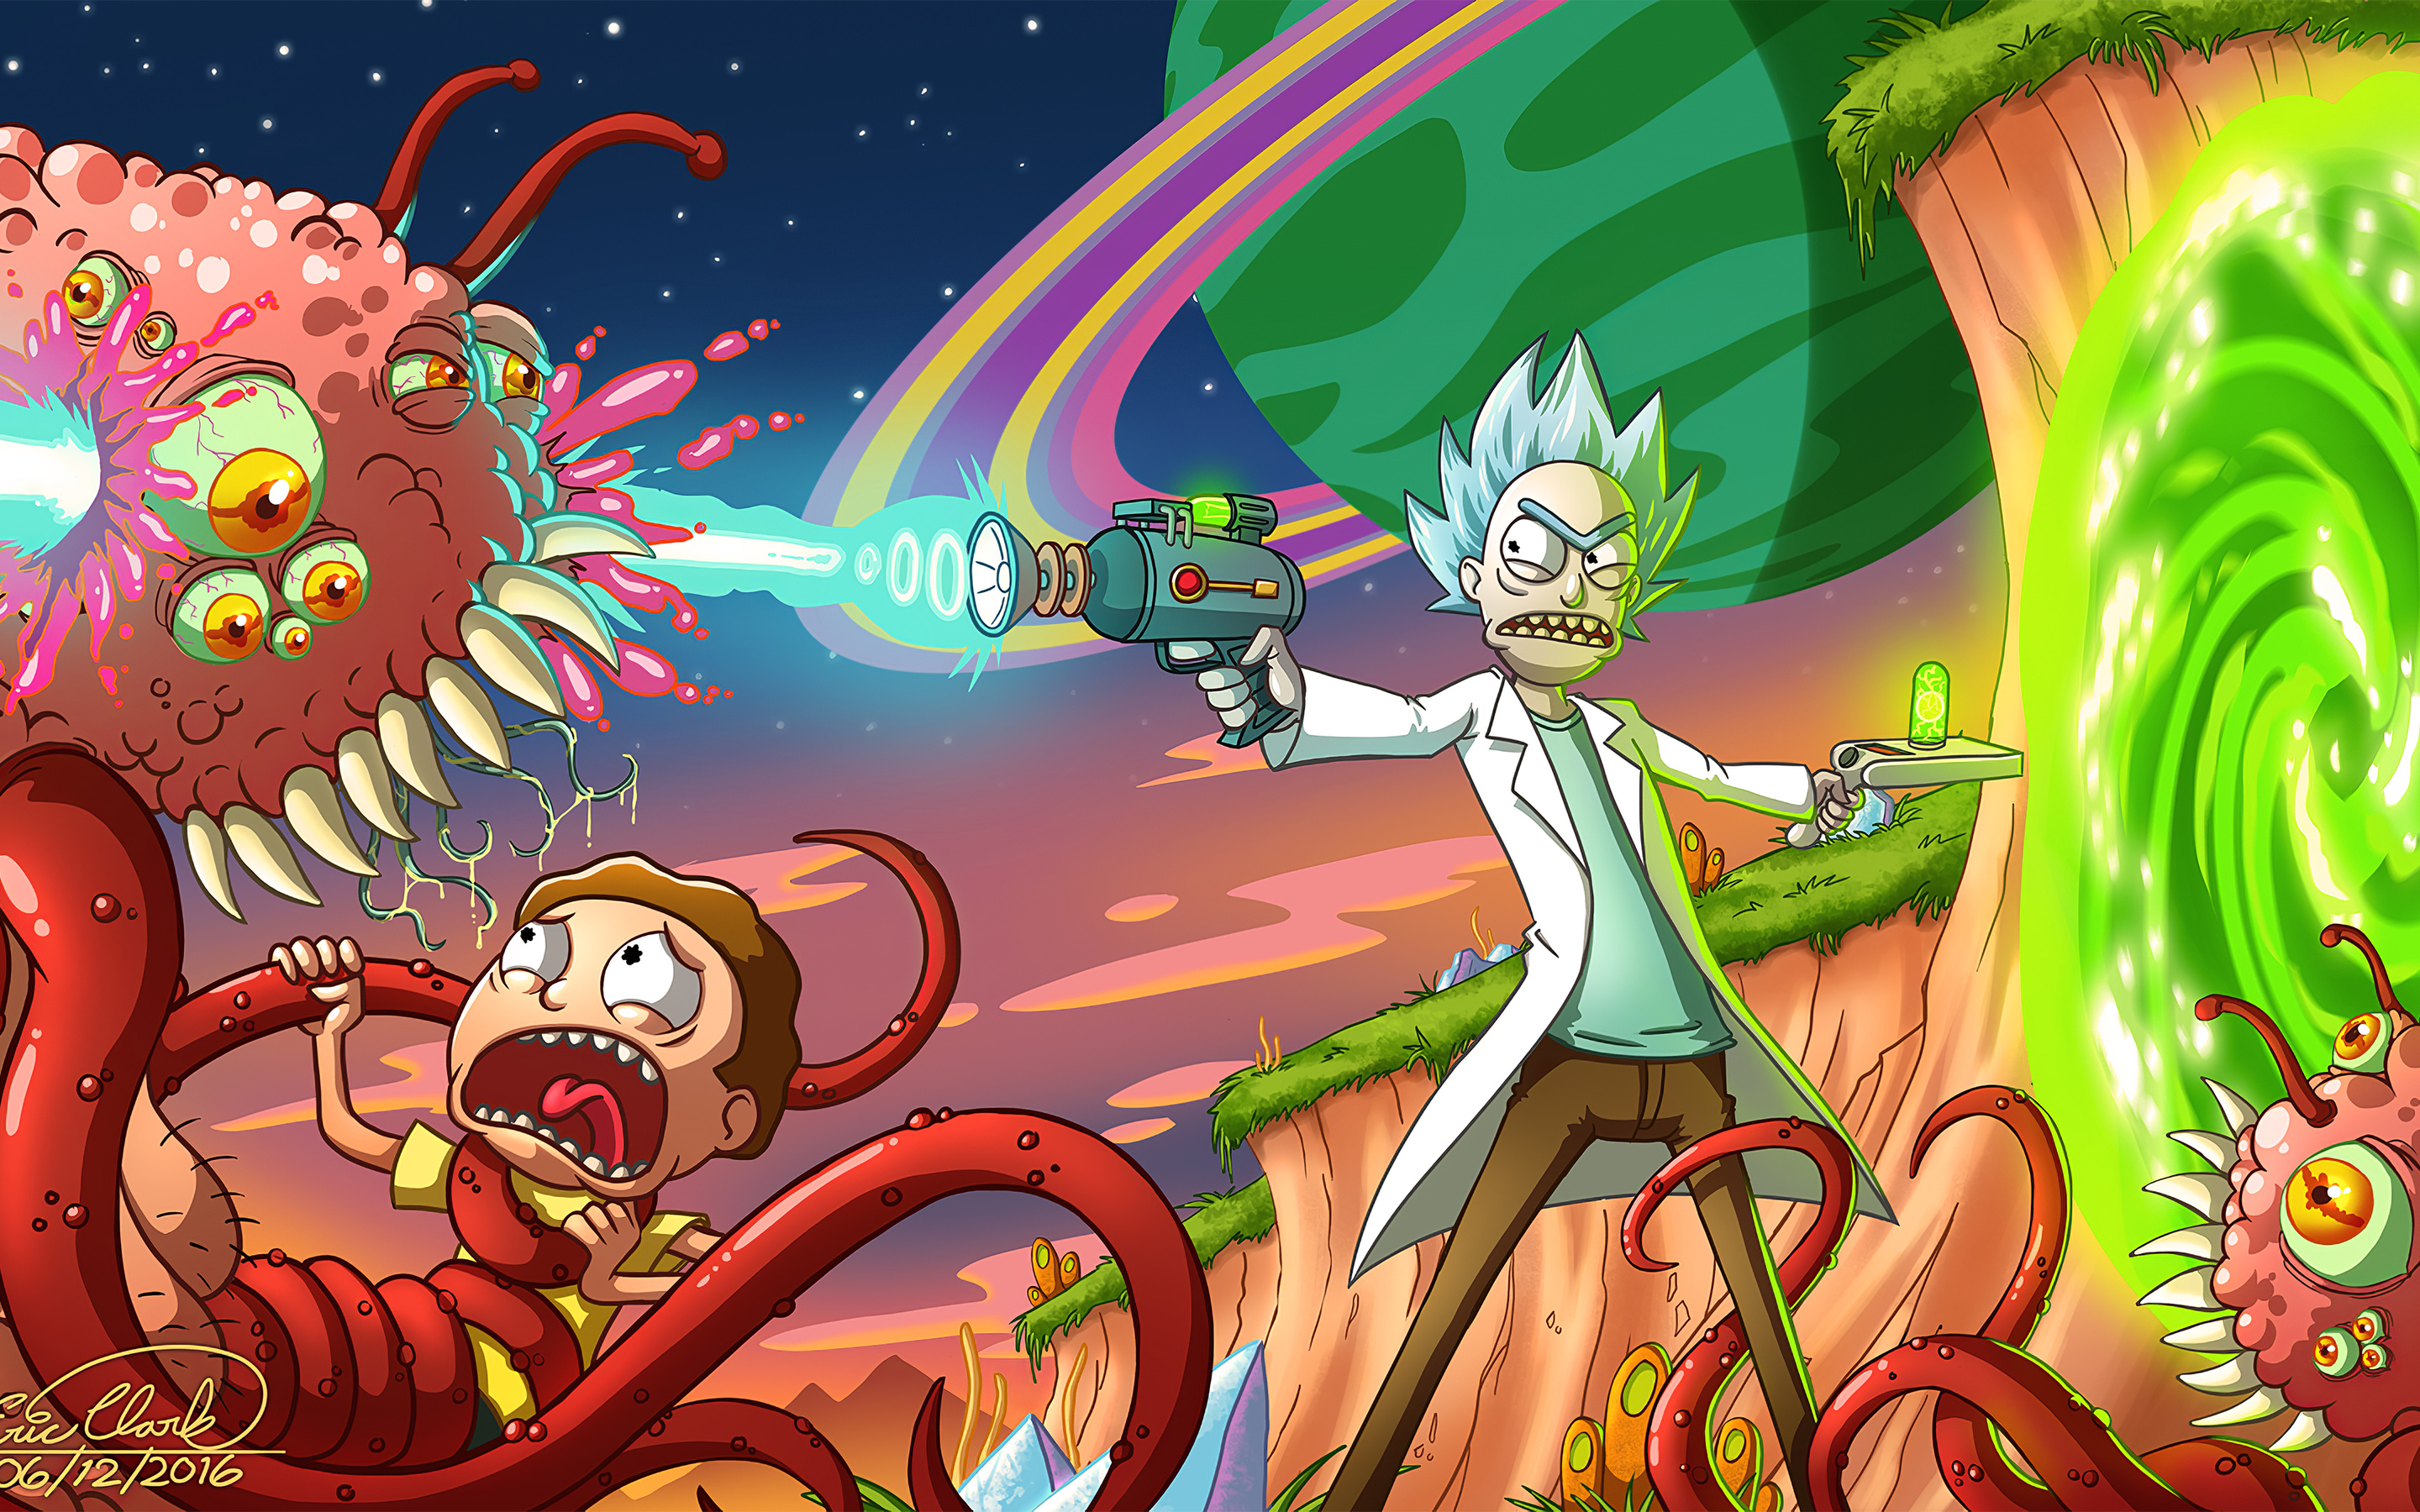 Rick And Morty Macbook Wallpapers